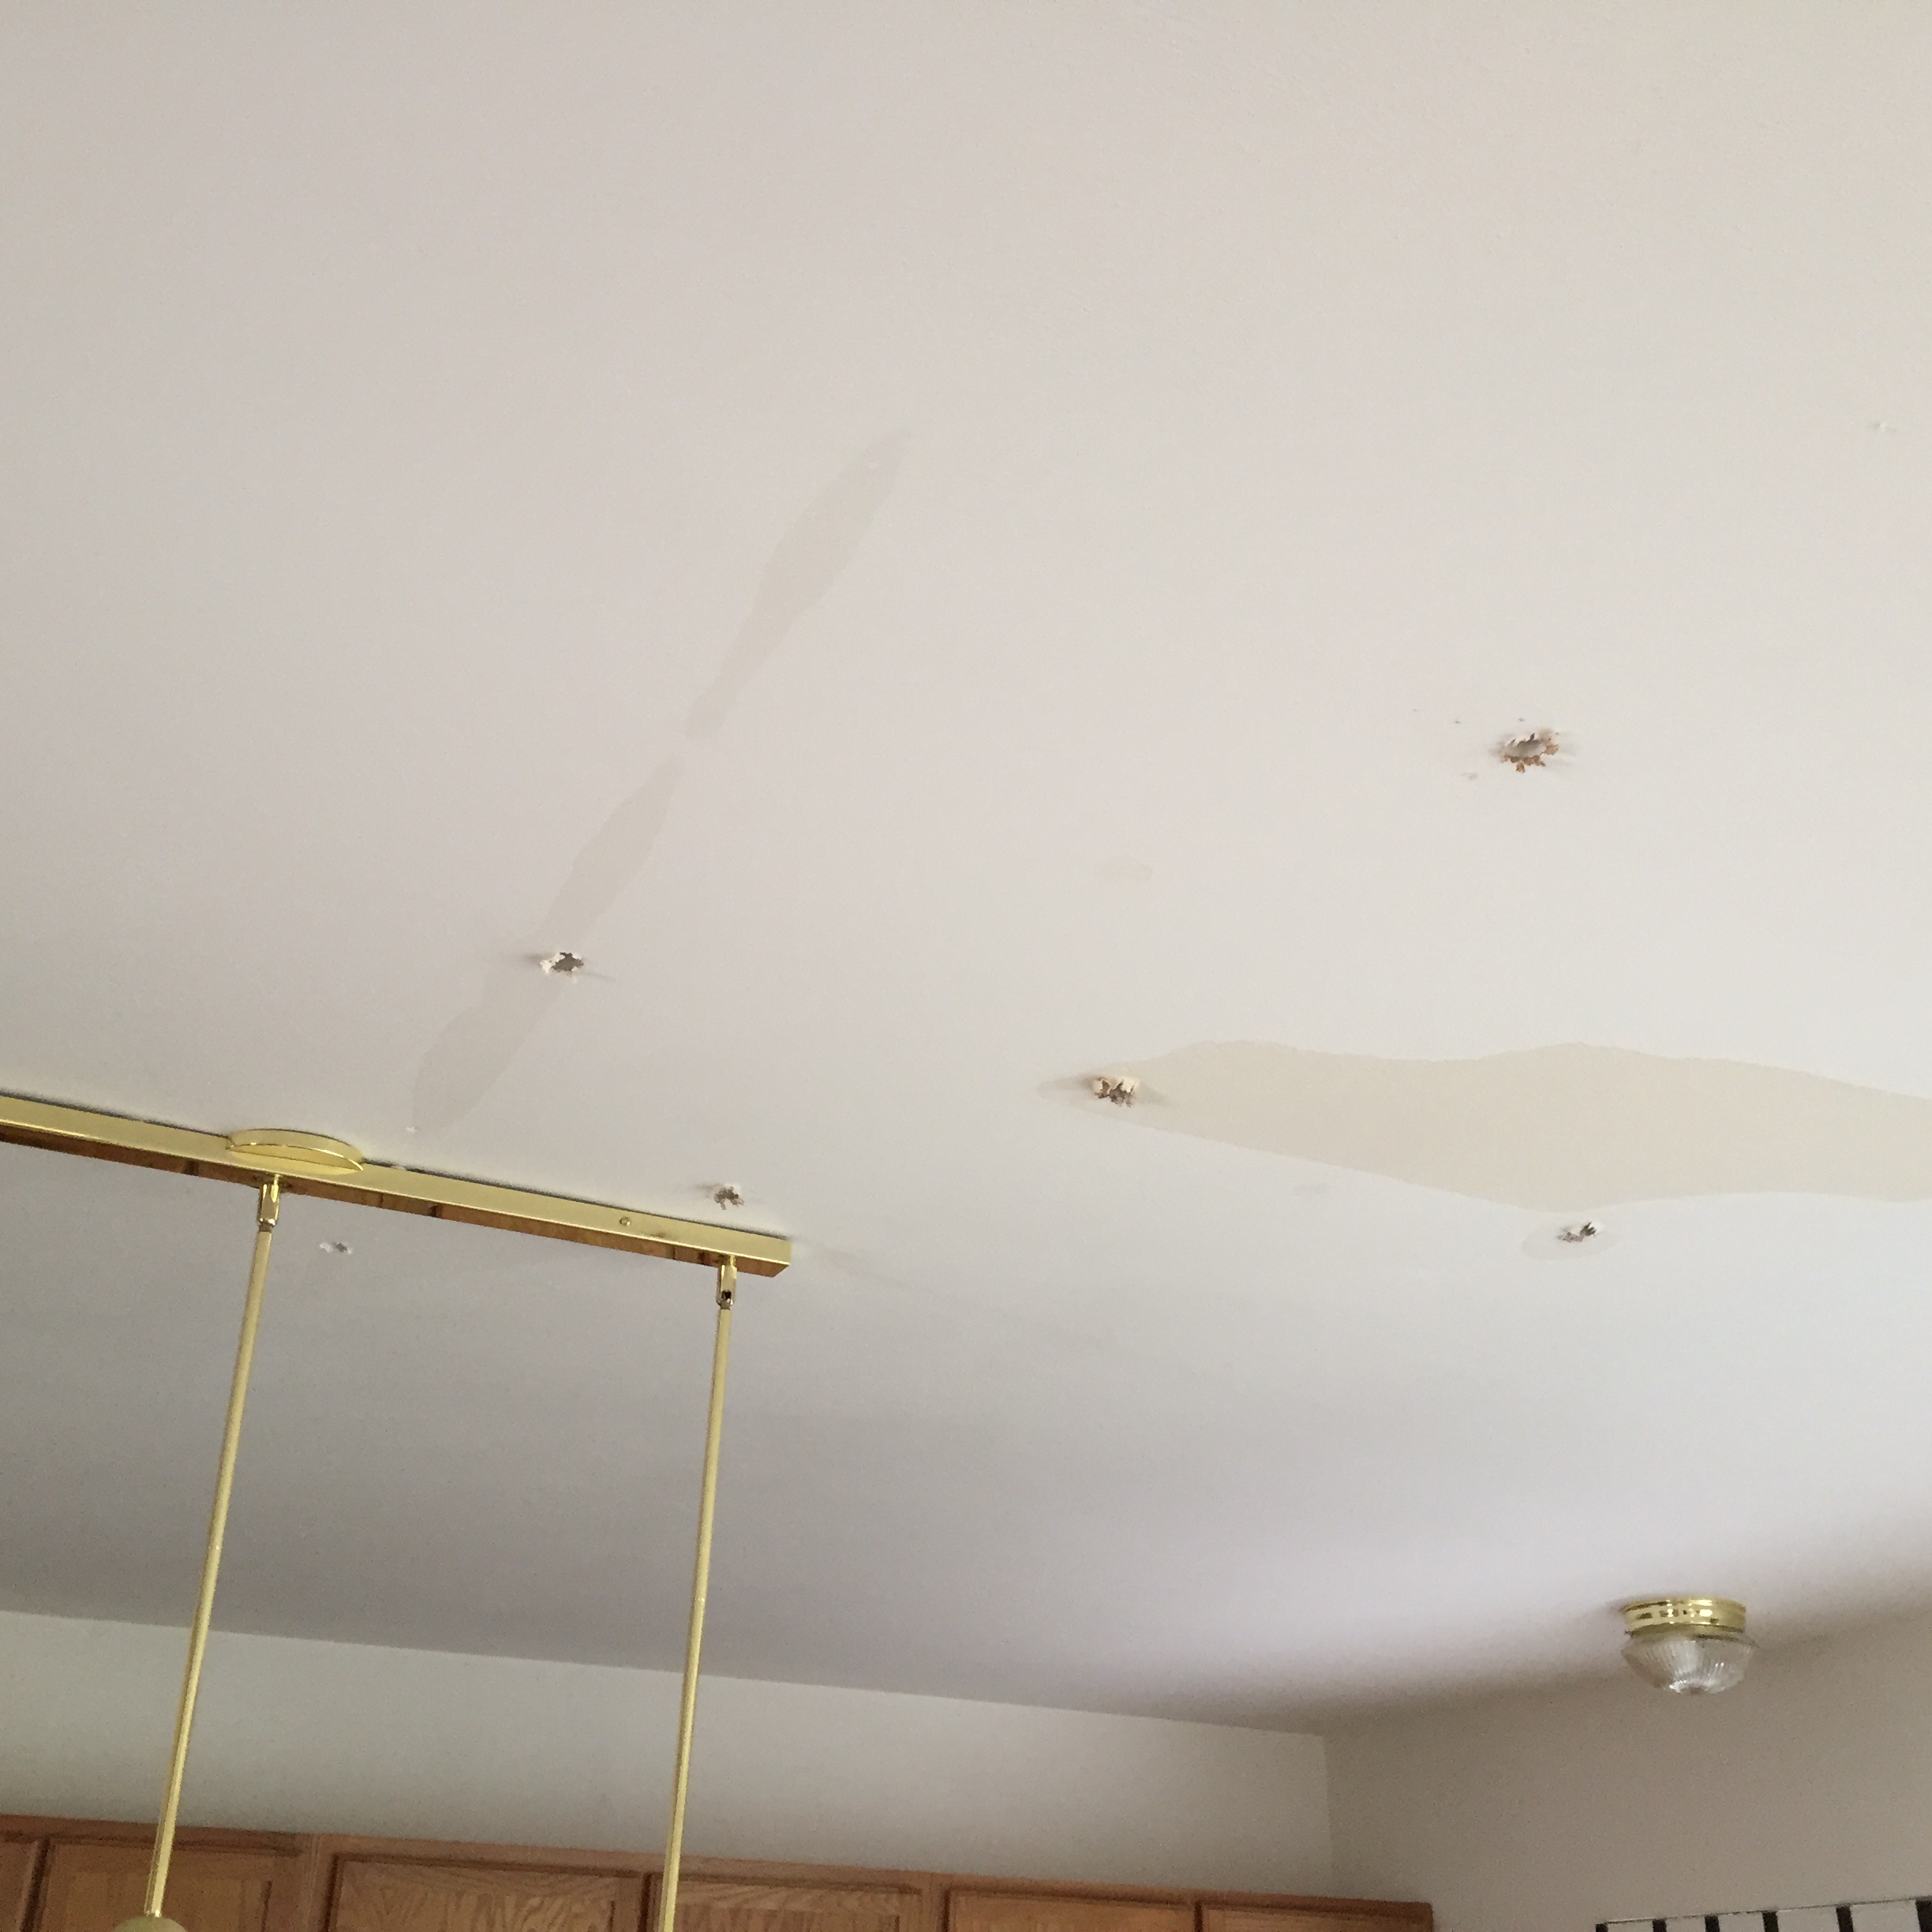 Can you spot the water damage? SERVPRO is here to help.